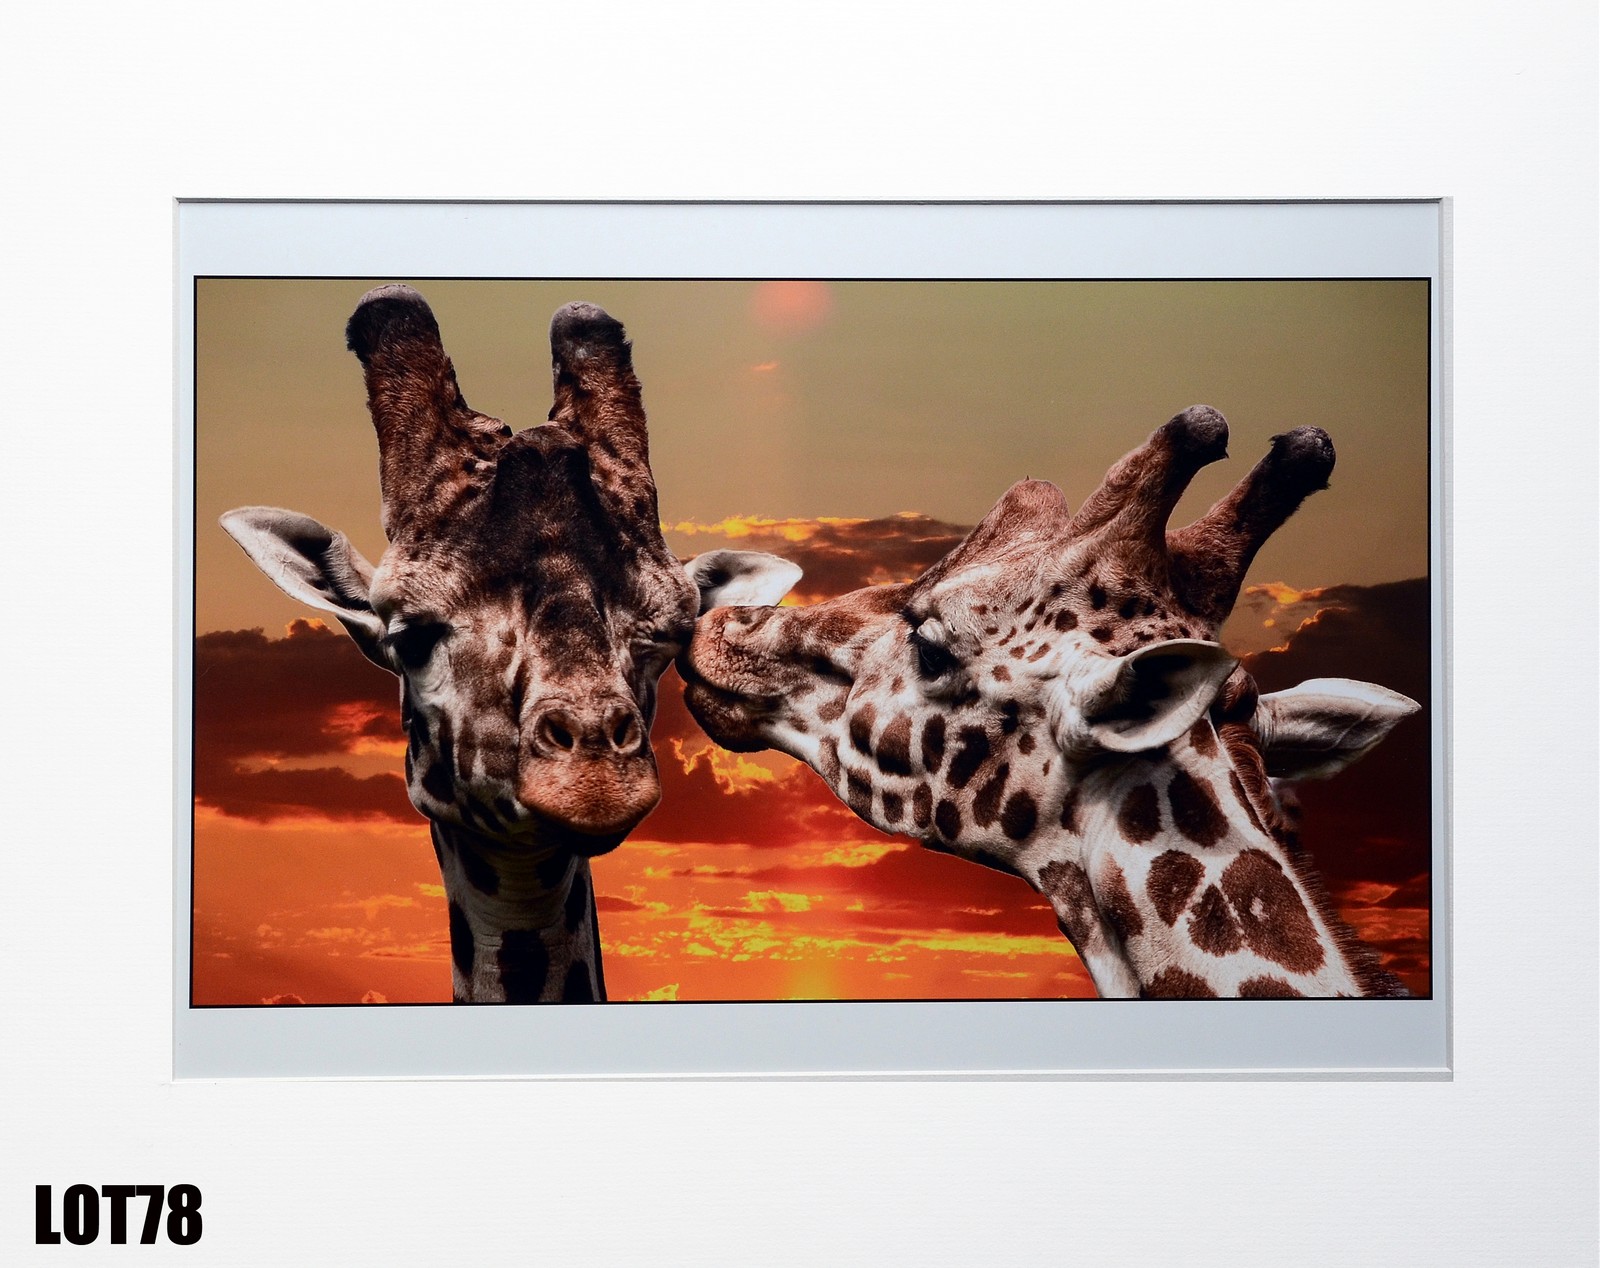 "The Kiss" (38x22cm) by William McDonough – mounted print Bill McDonough developed a passion for